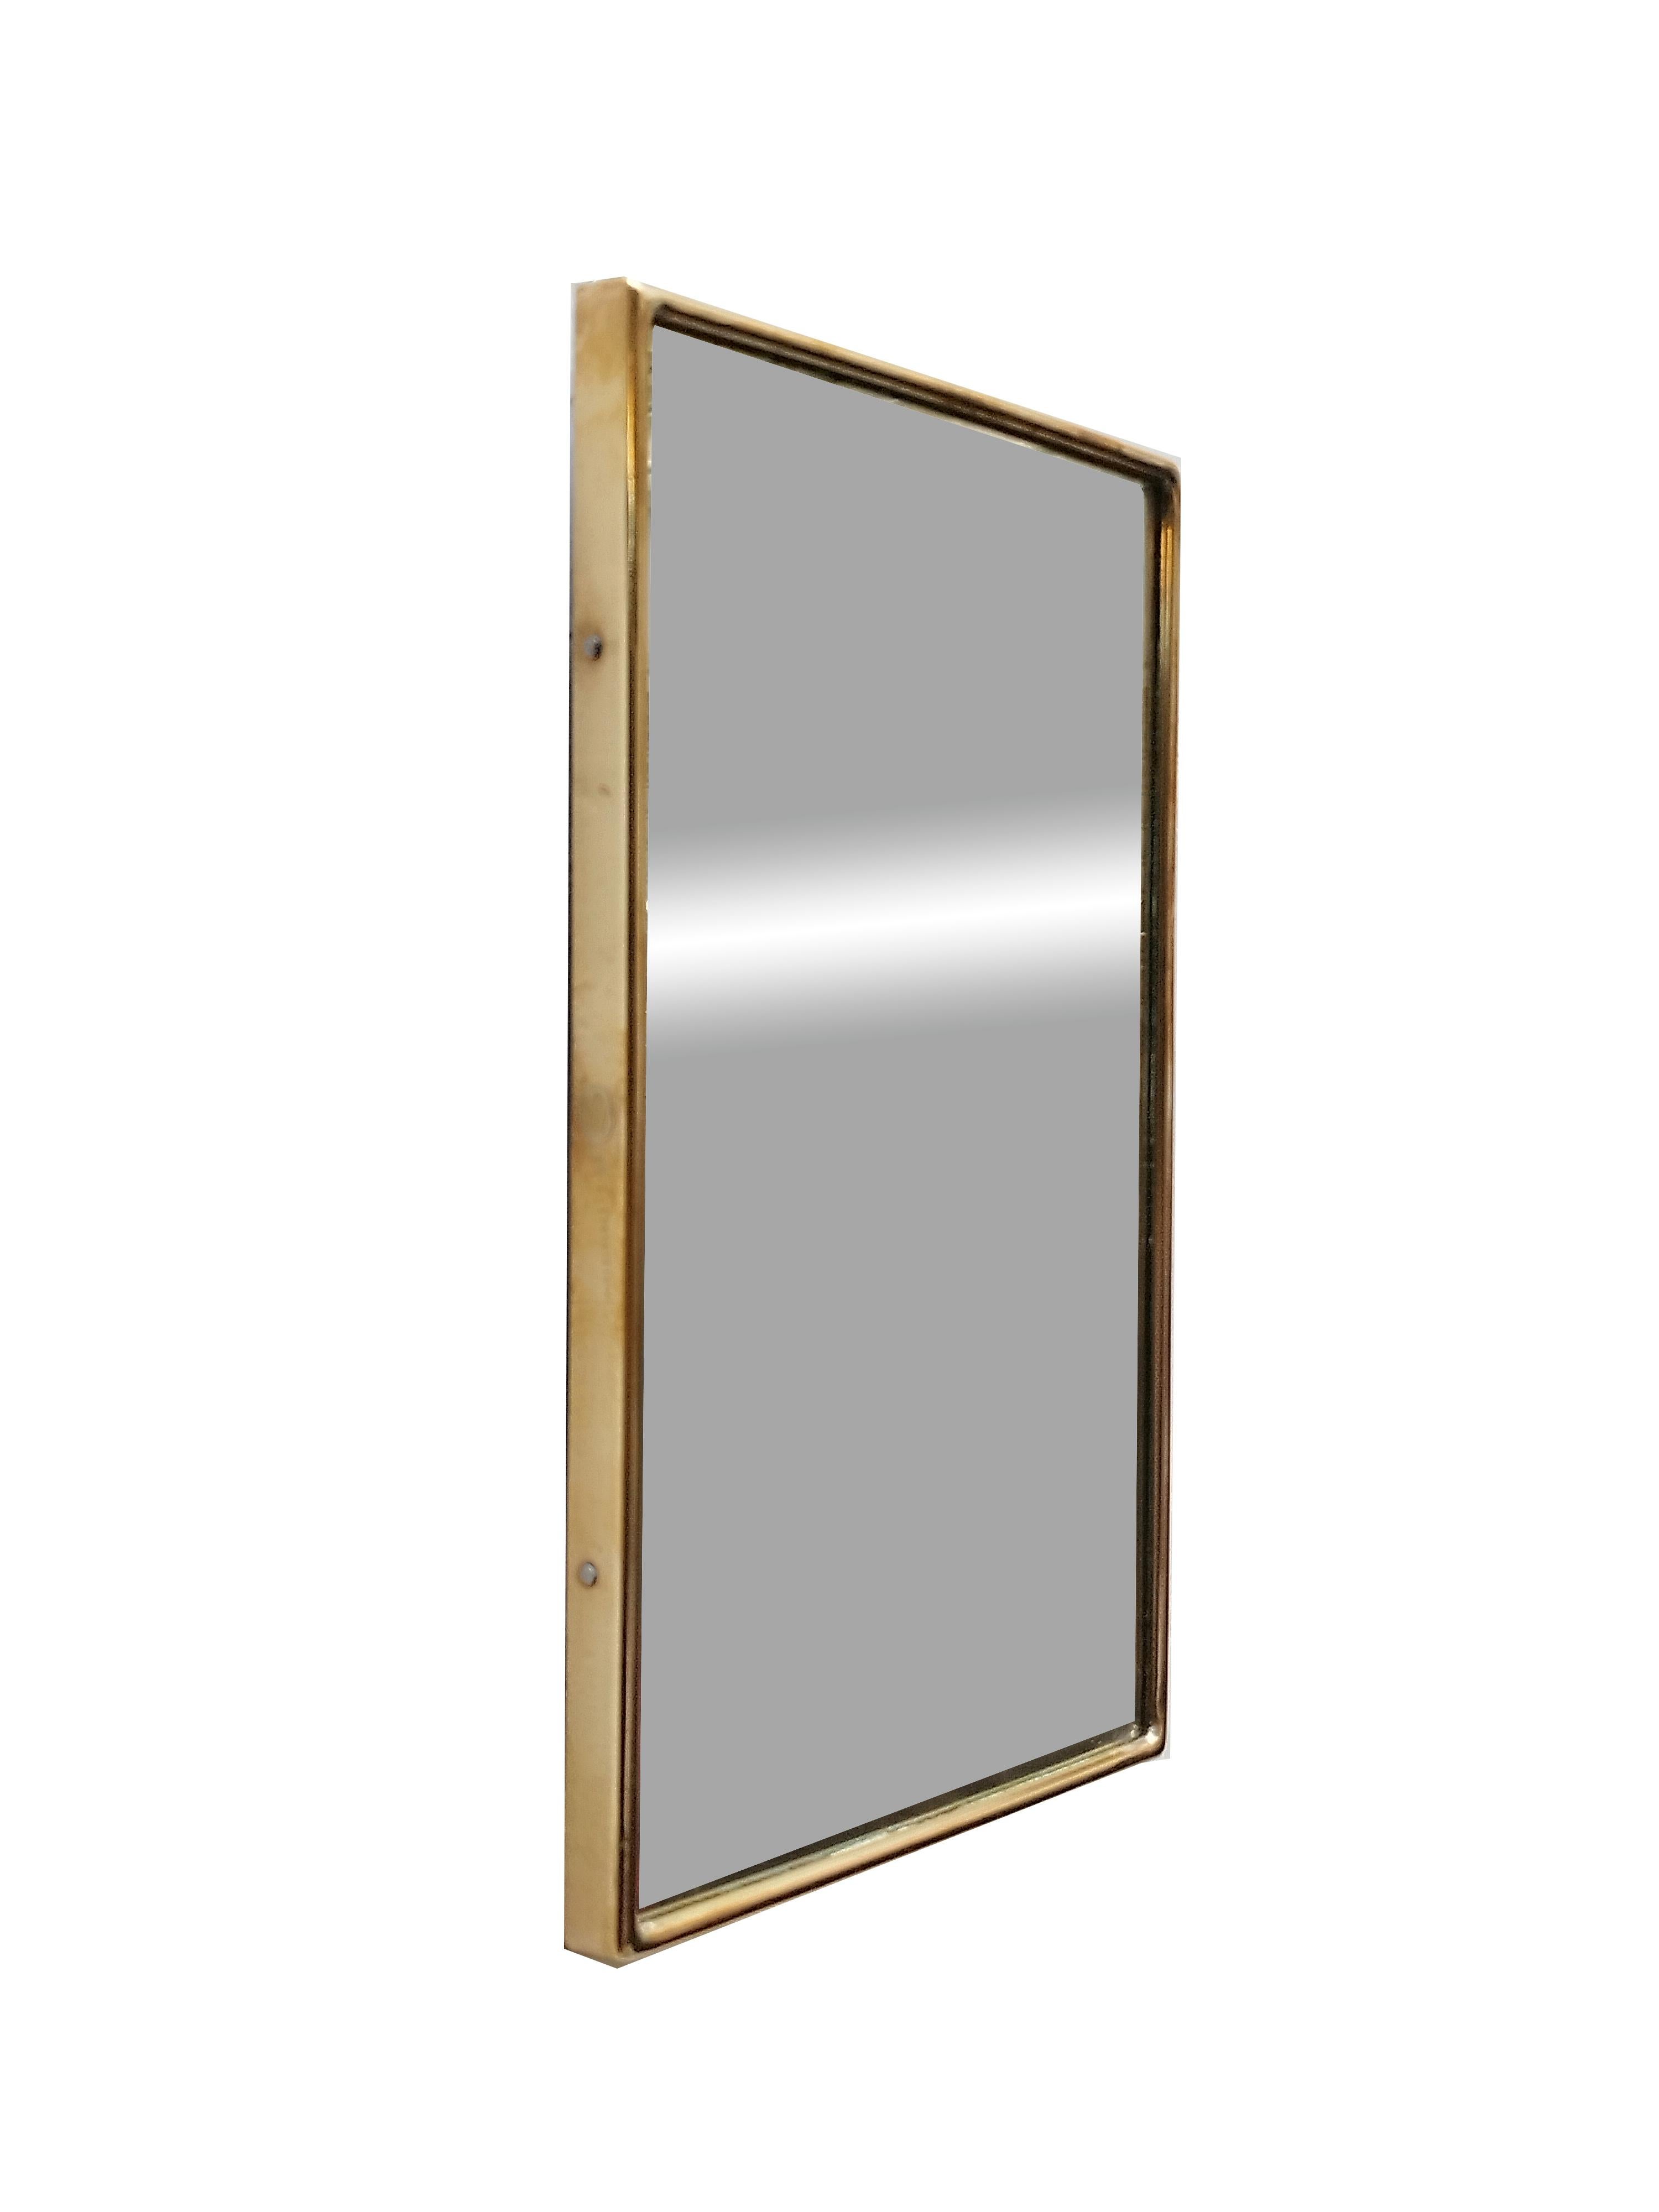 Small rectangular mirror with brass frame, 1960s. Showing some minor signs of time, the mirror is original to the period.